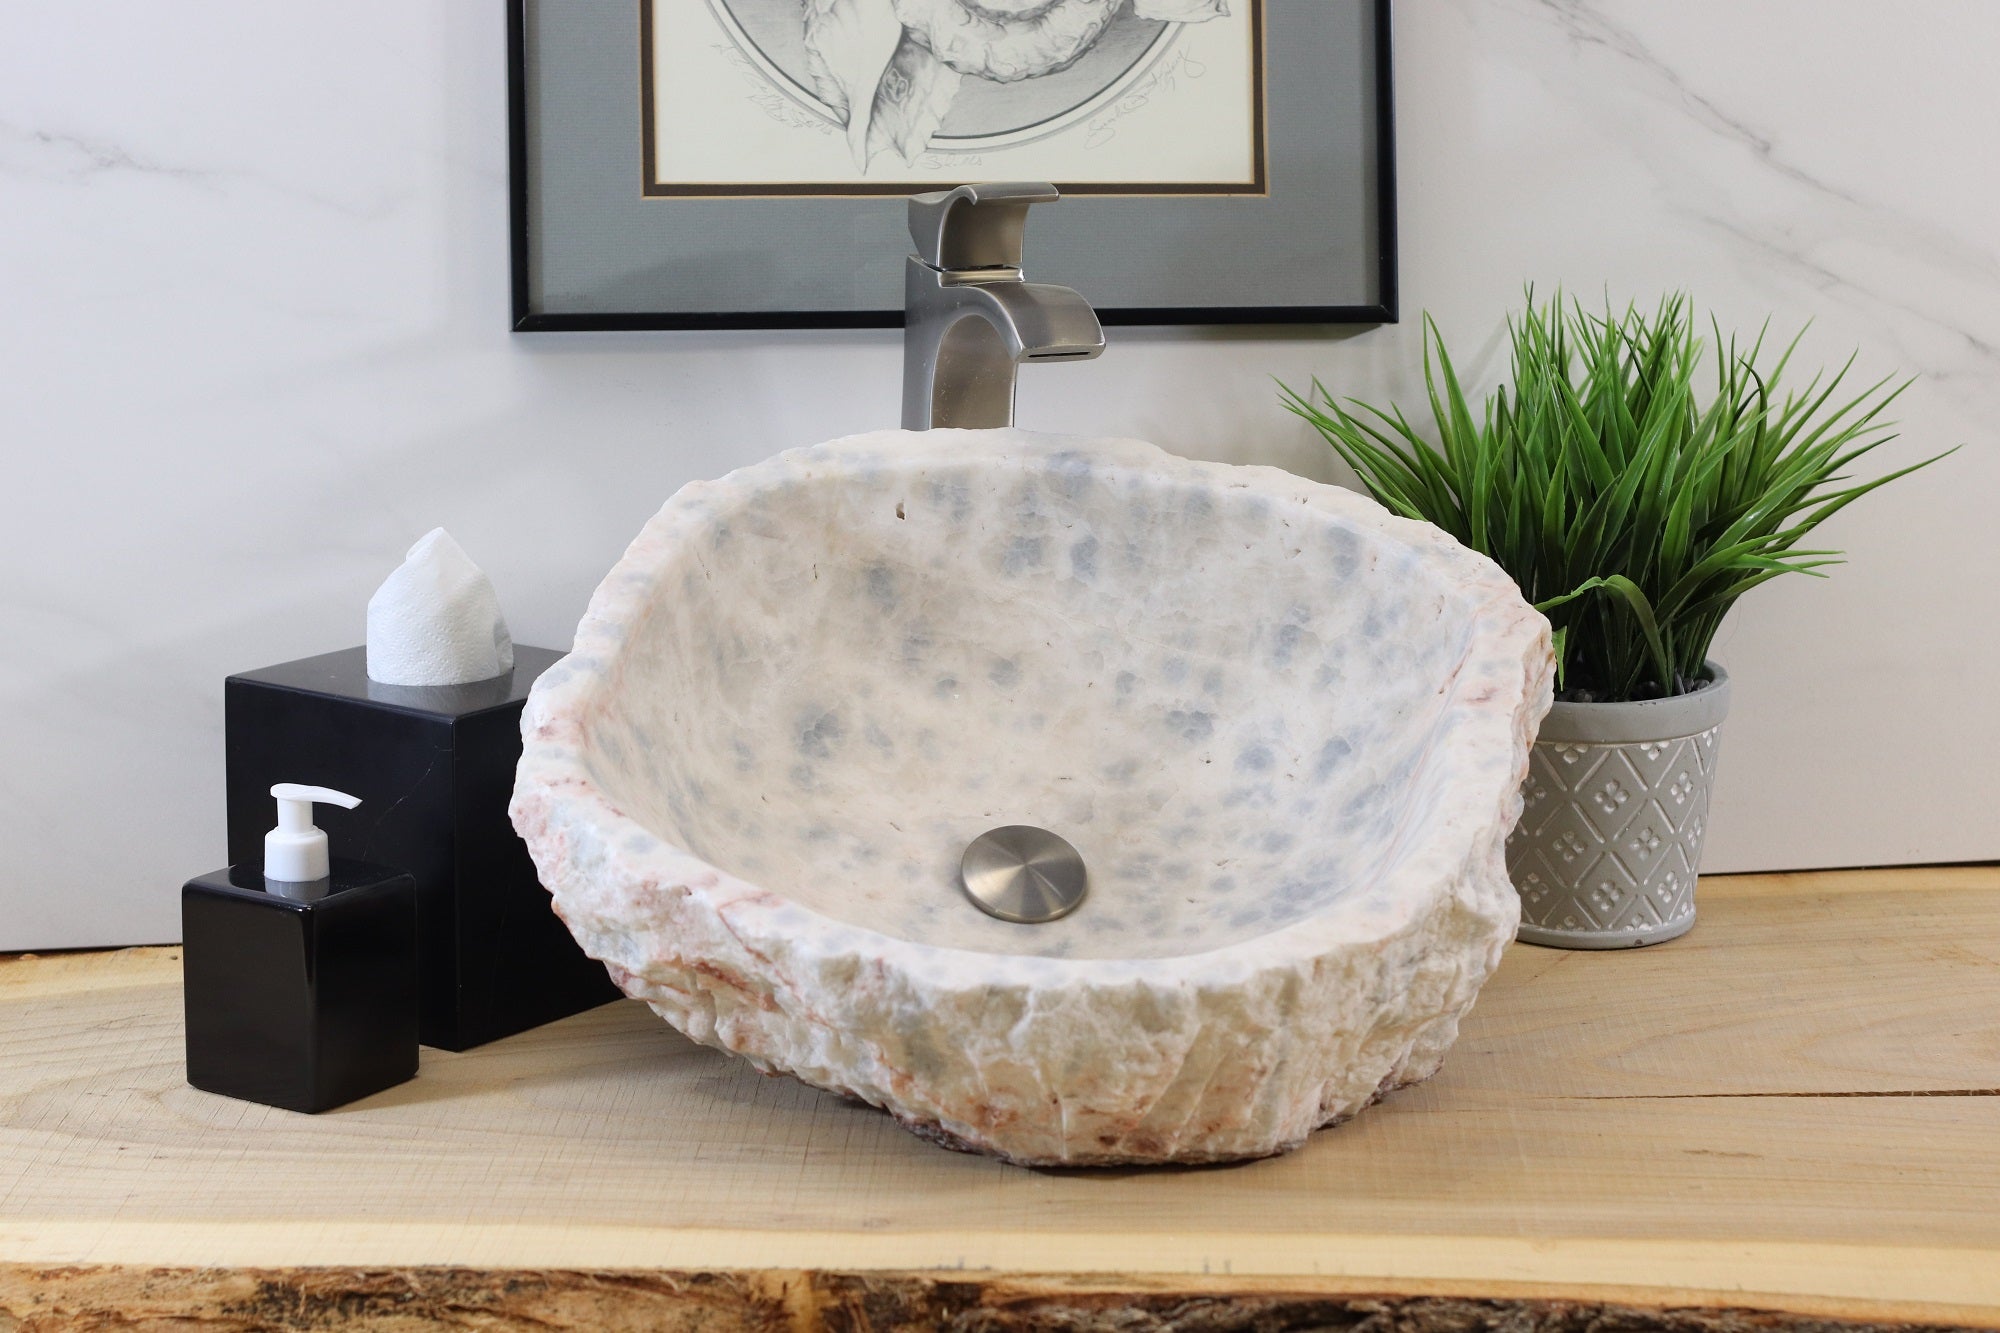 White and Gray Onyx Stone Bathroom Vessel Sink. A beautiful work of art. We offer fast shipping. Handmade in Mexico. We hand finish, package, and ship from the USA. Buy now at www.felipeandgrace.com. 